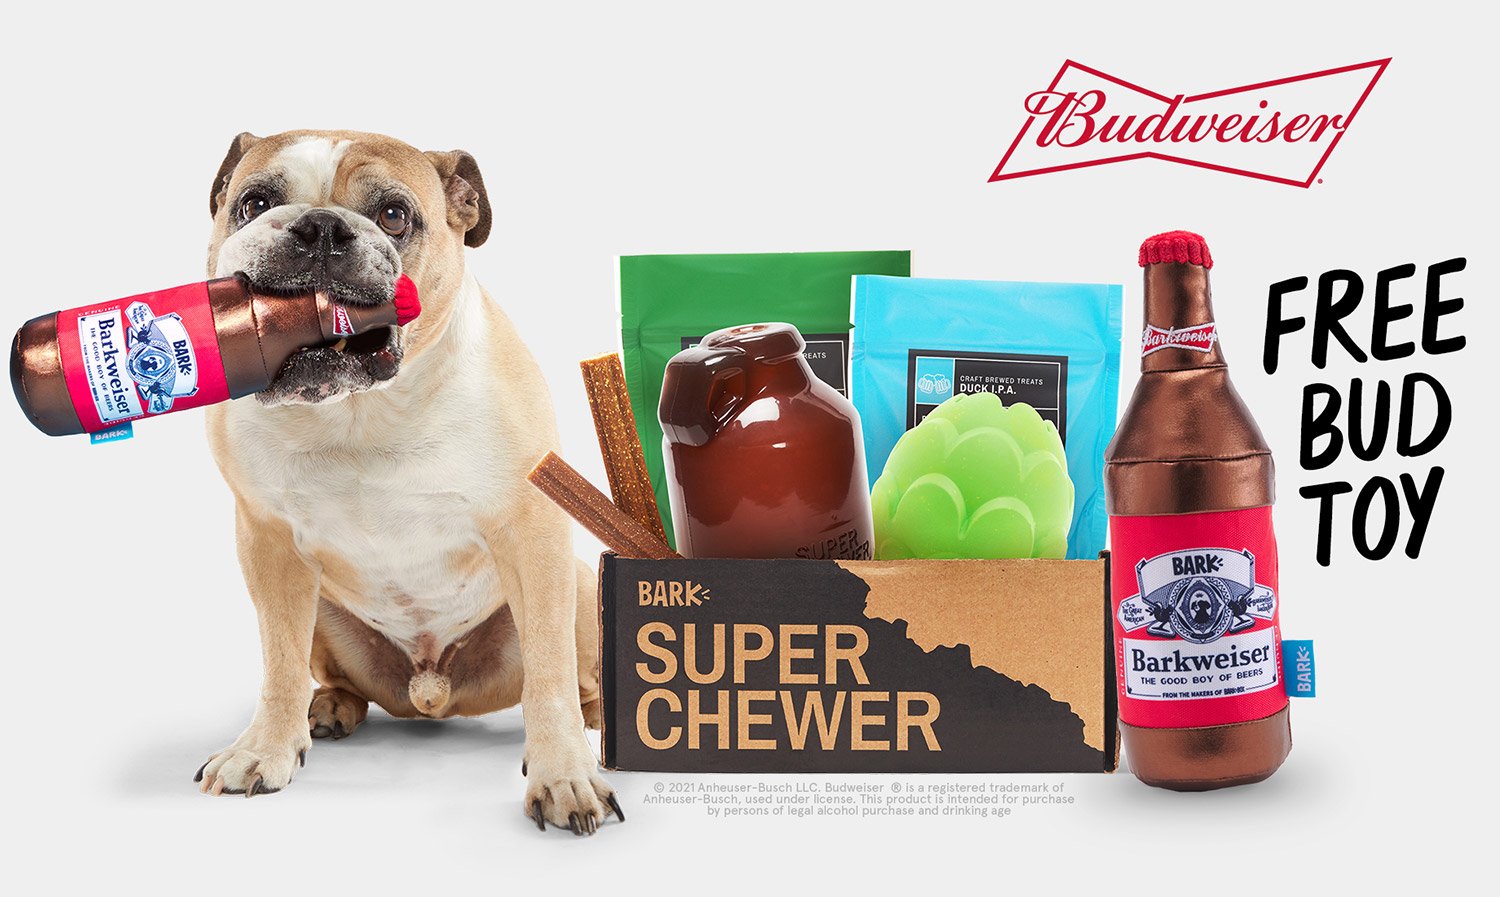 Super Chewer Deal – Free Budweiser Toy with Multi-Month Subscription!